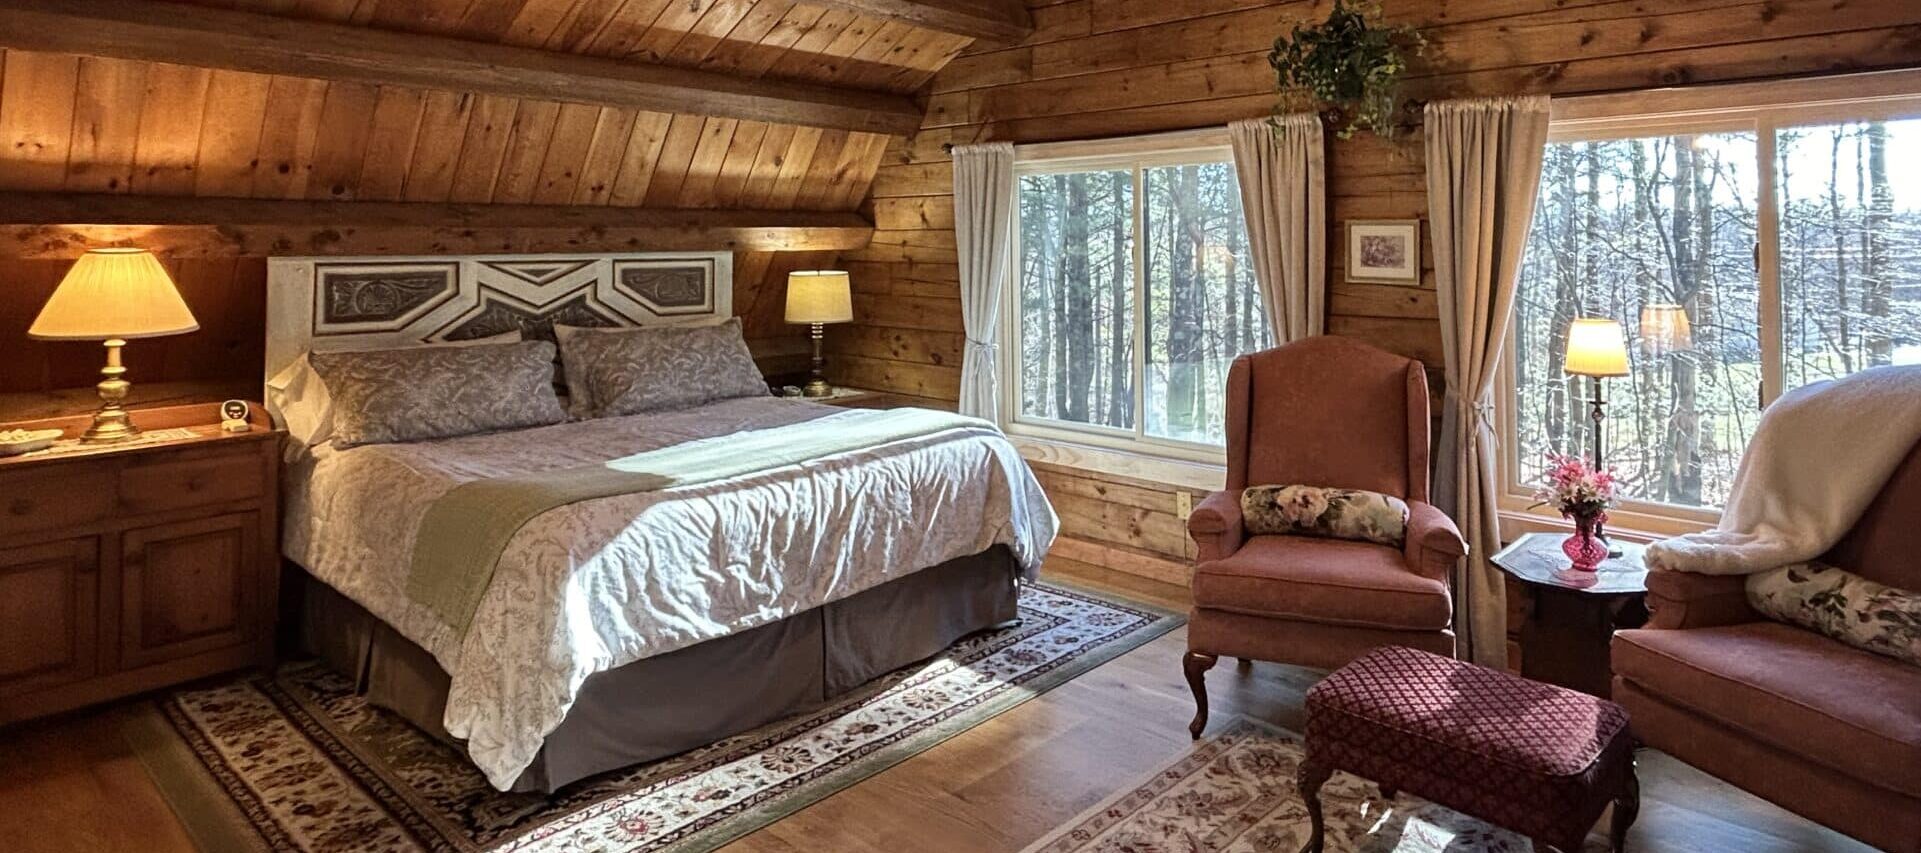 The Ramblewood Room has a king size bed, repurposed headboard, off-white spread, and a sitting area with 2 wingback chairs. The large windows with beige drapers look out over the front forest.